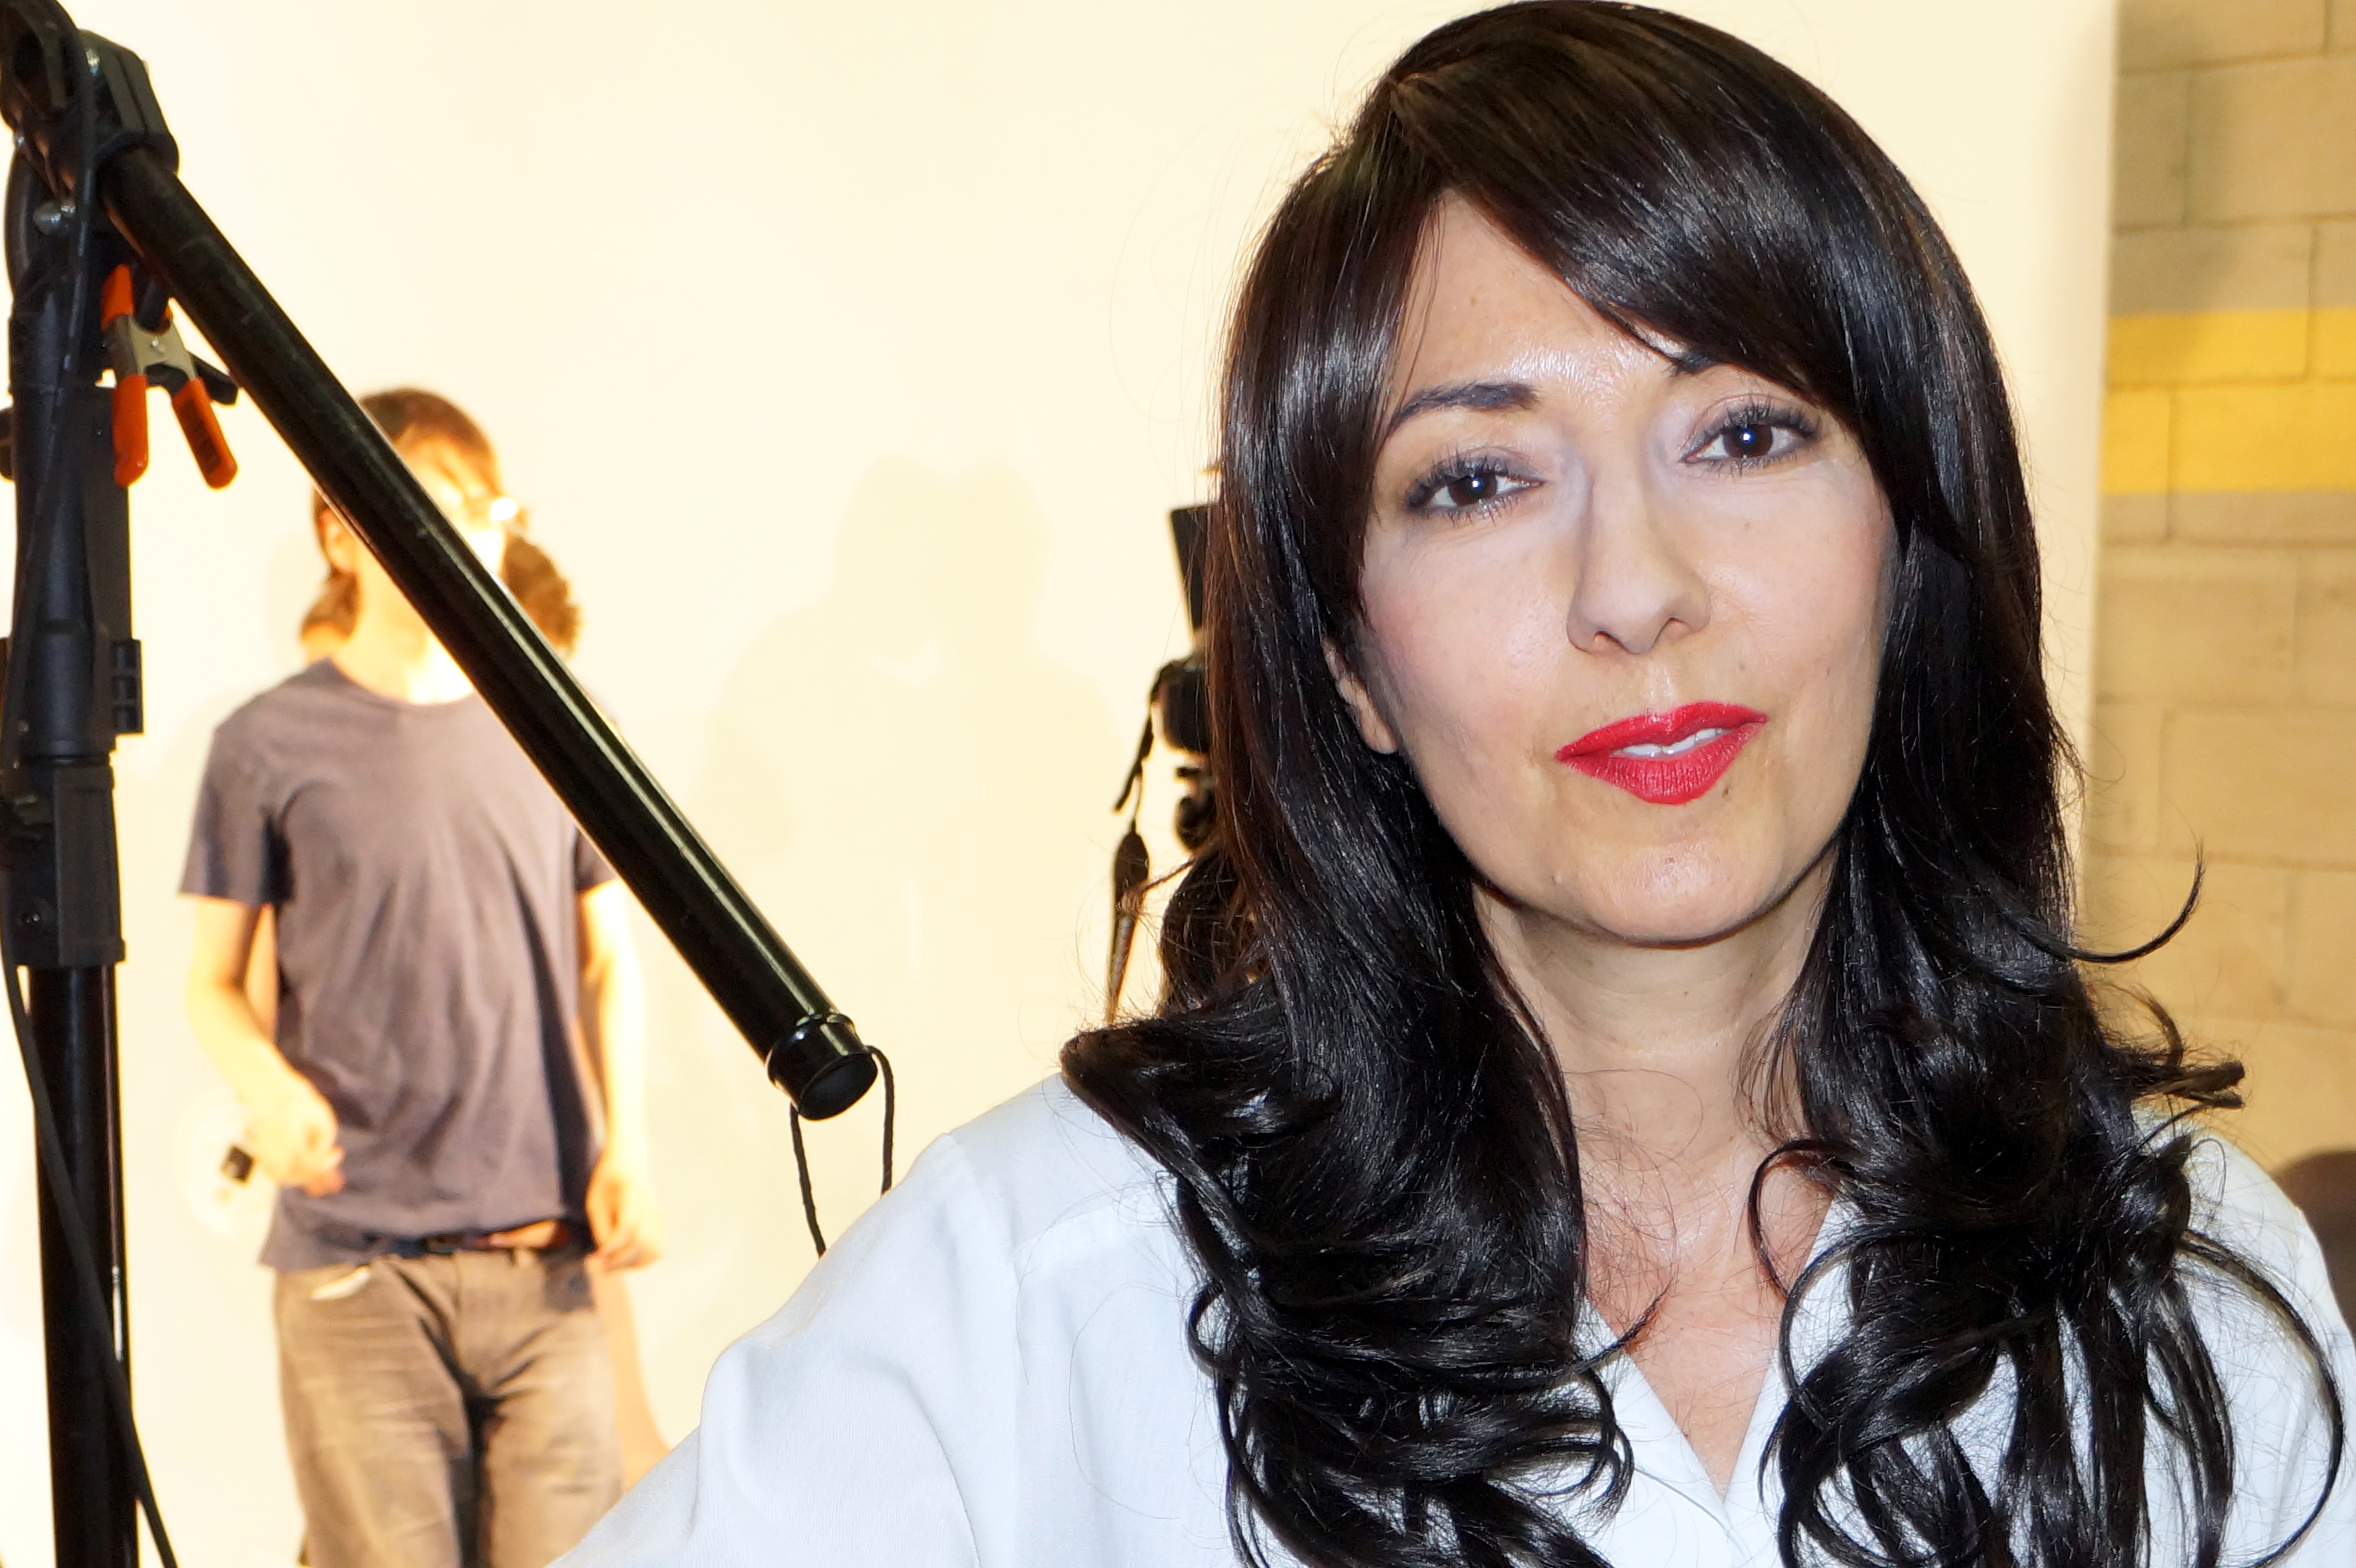 Luciana Lagana (playing the mathematician related to Galileo Galilei) on the set of the experimental feature film VREM on 08/10/2014